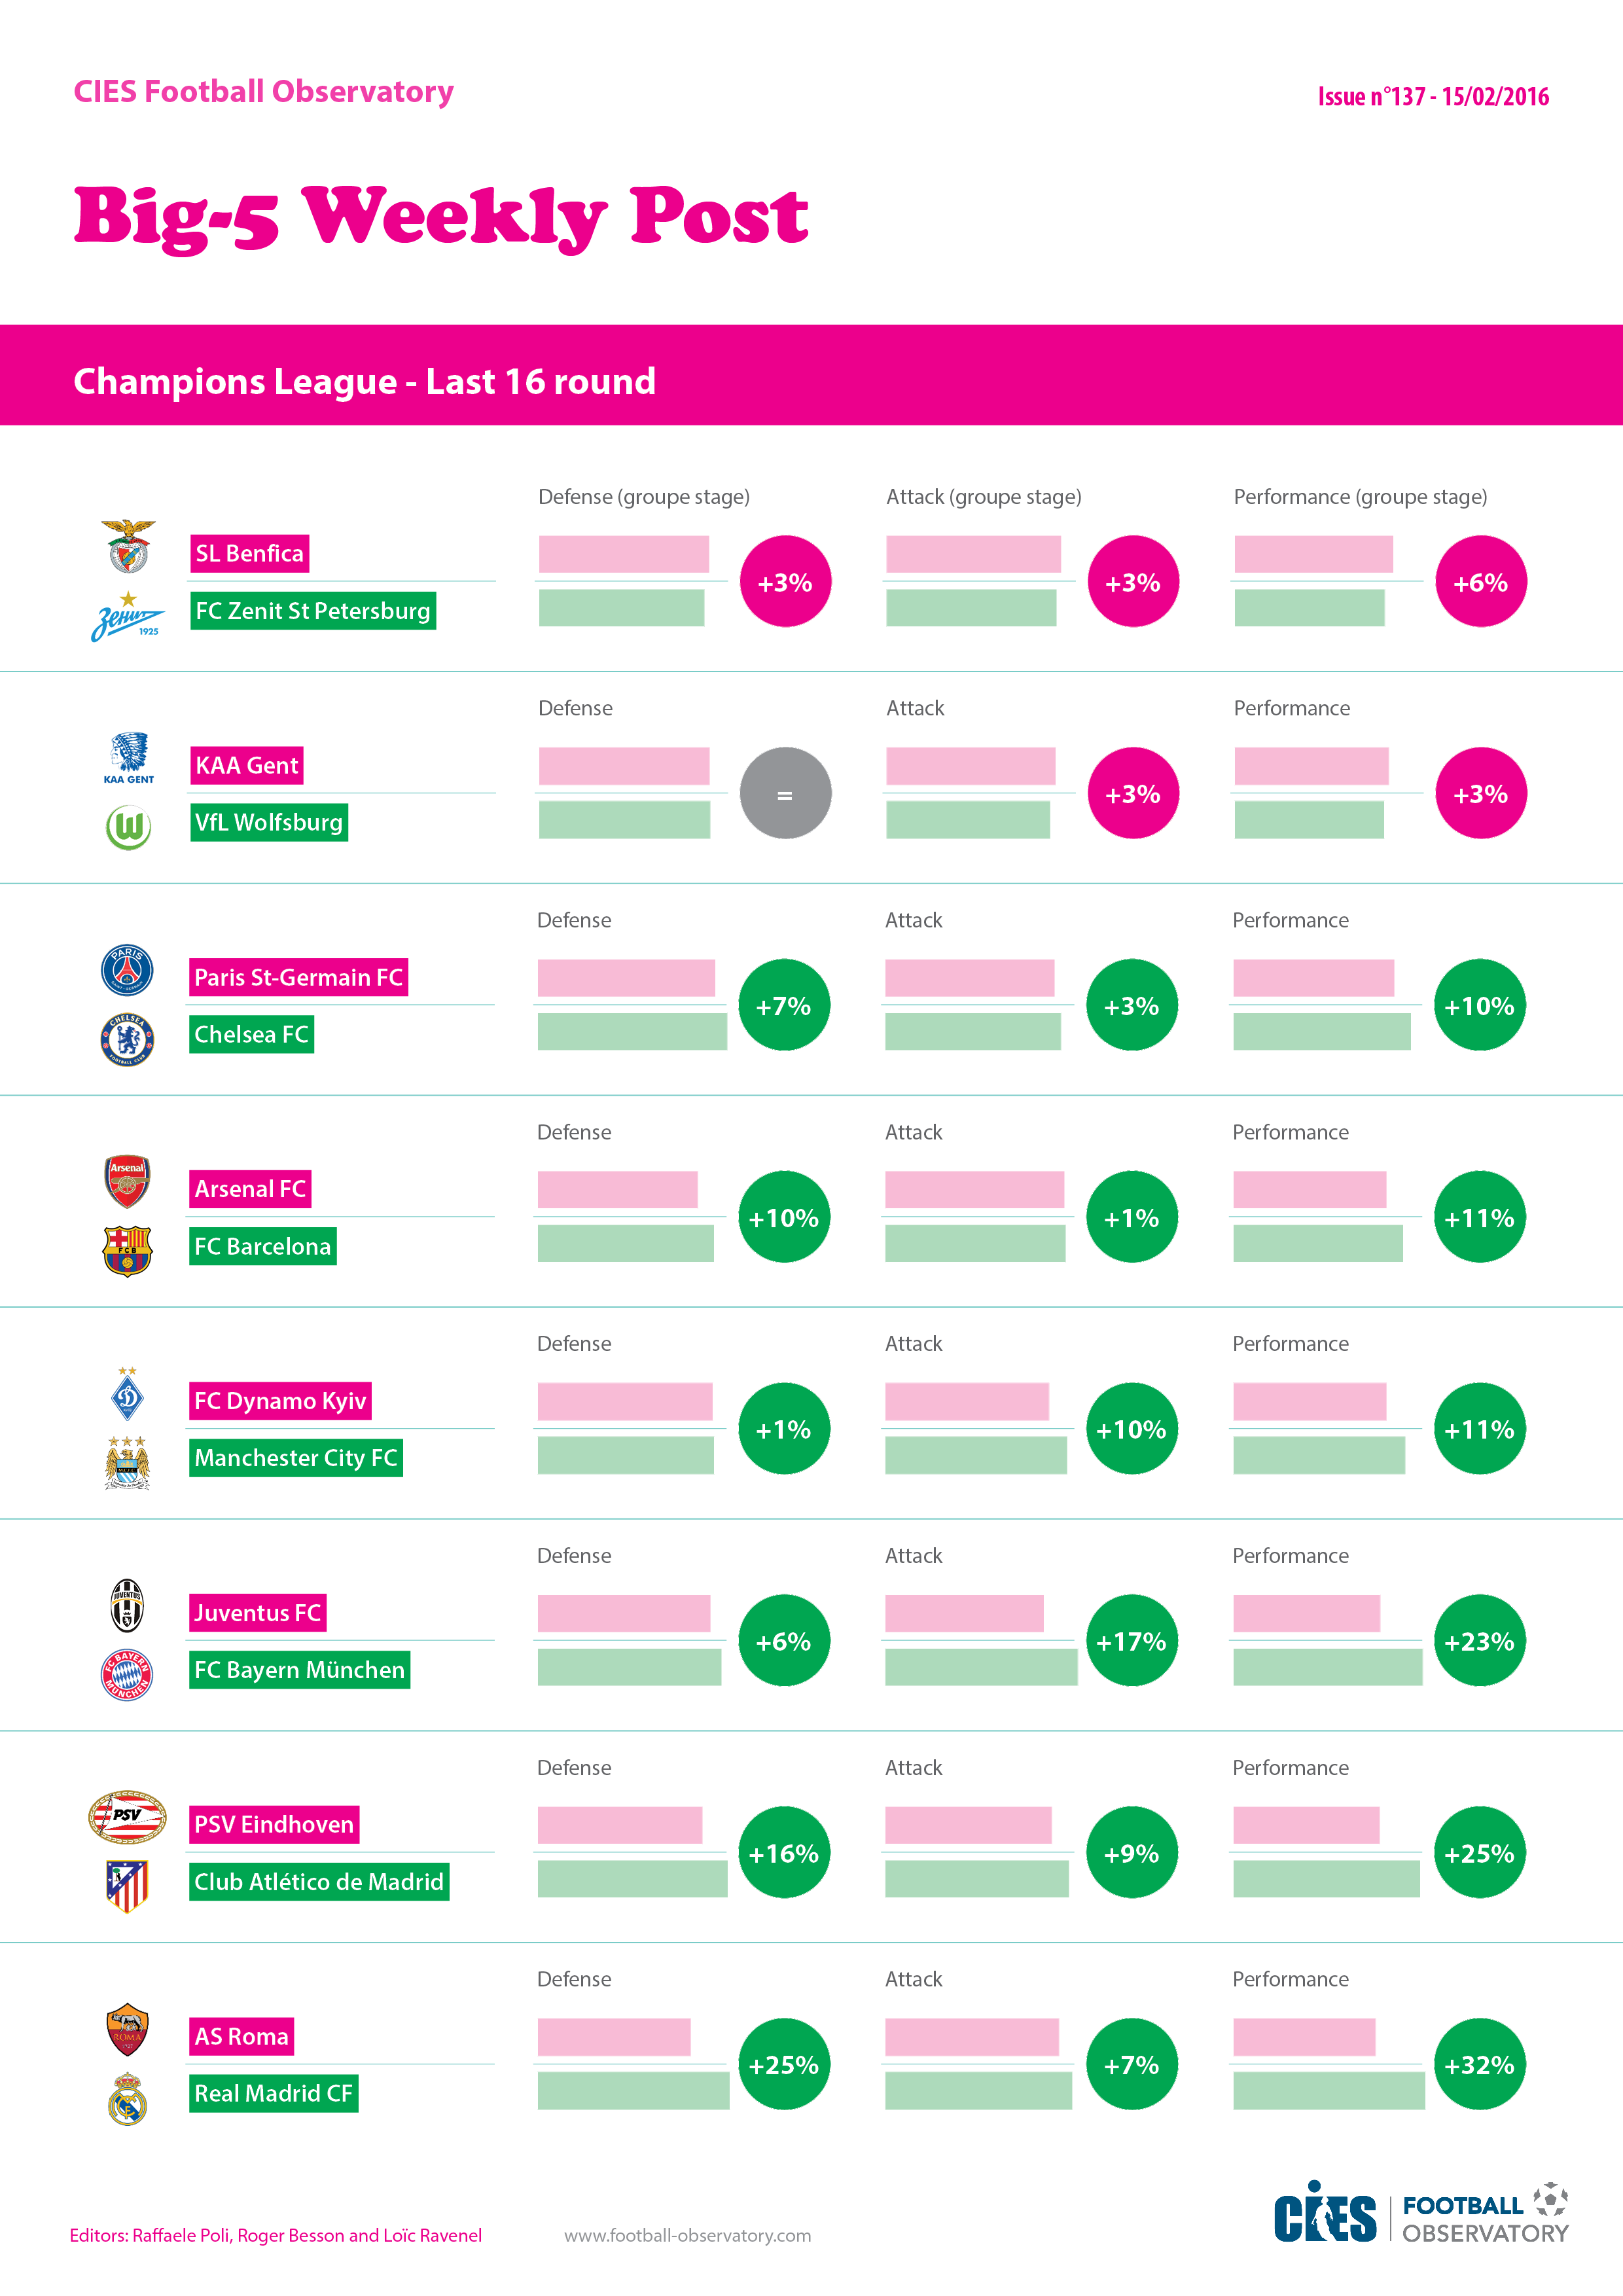 Figure: Champions League - Last 16 round: group stage performance